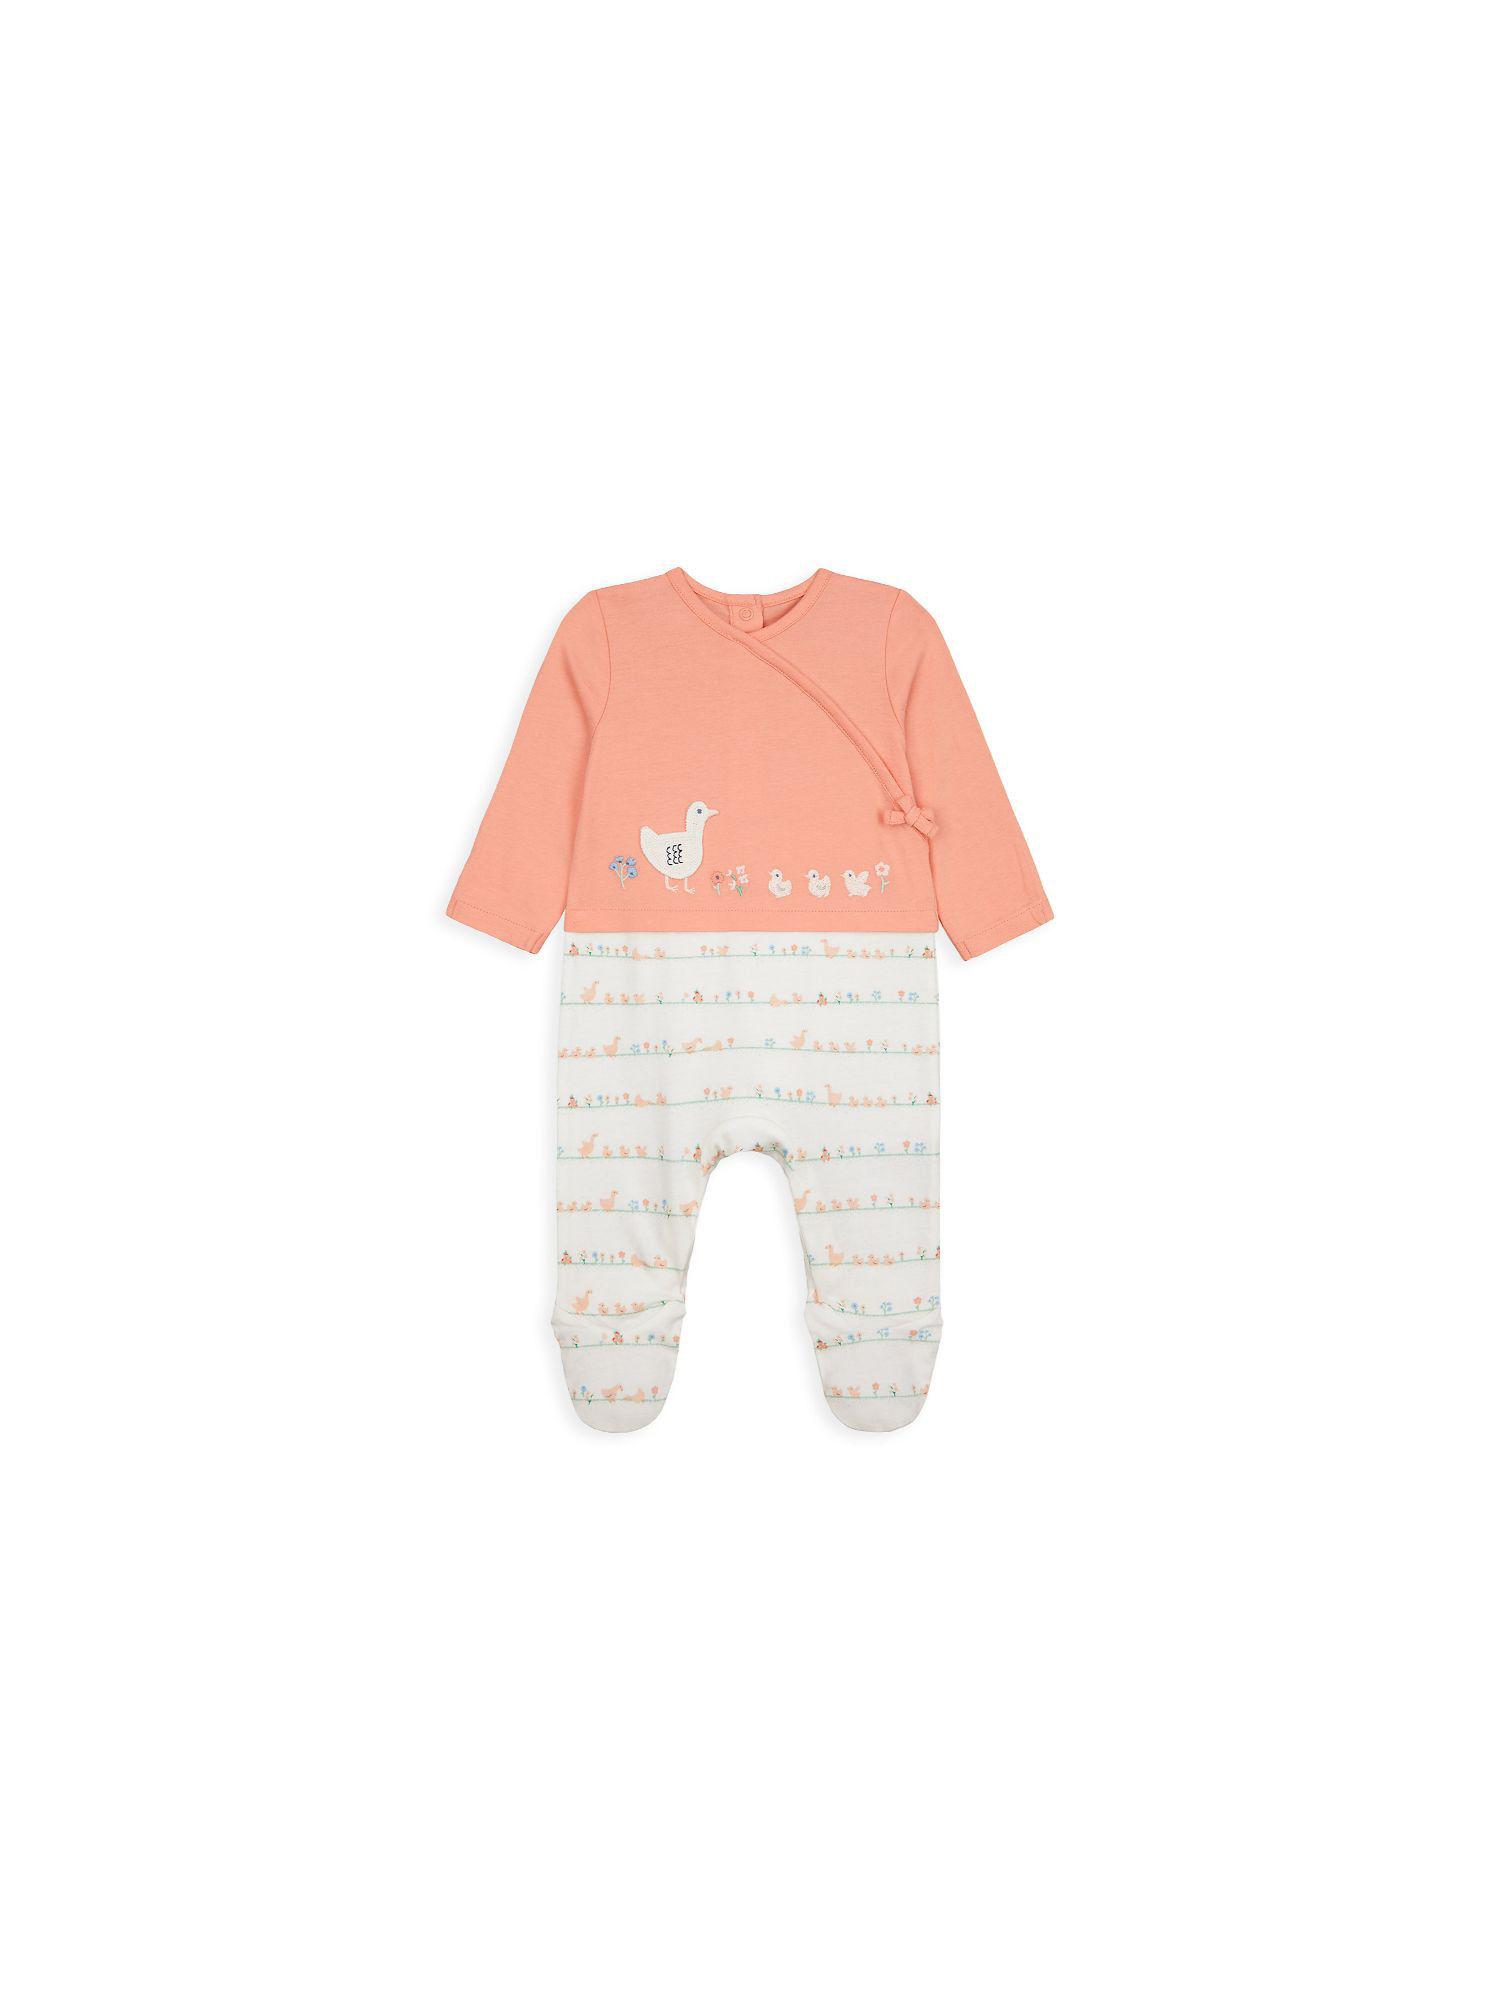 mother care baby onesies & rompers